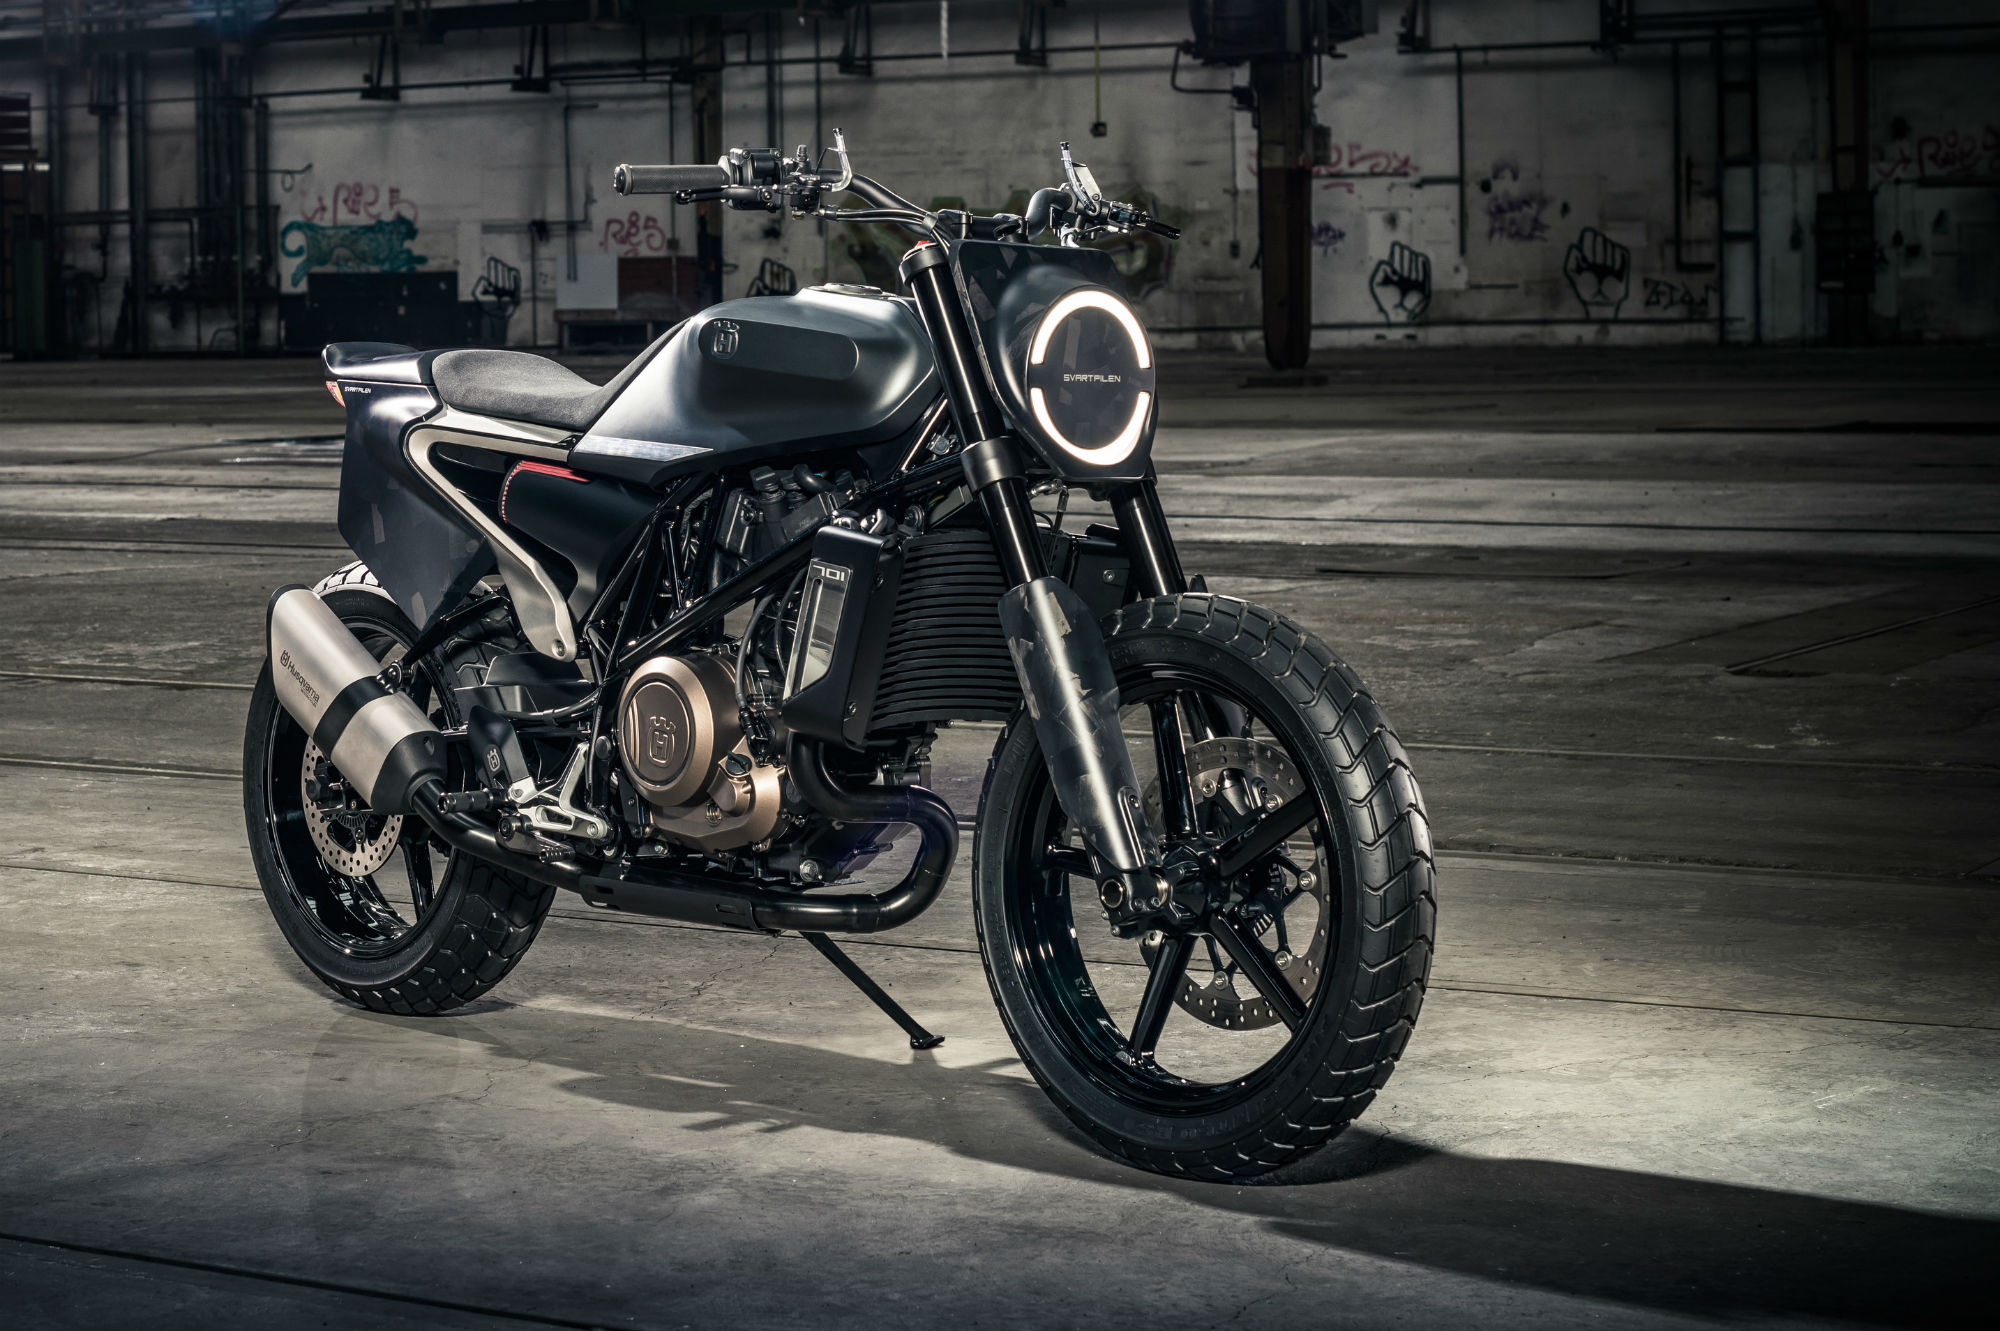 Top 5 bikes we are excited to see at EICMA 